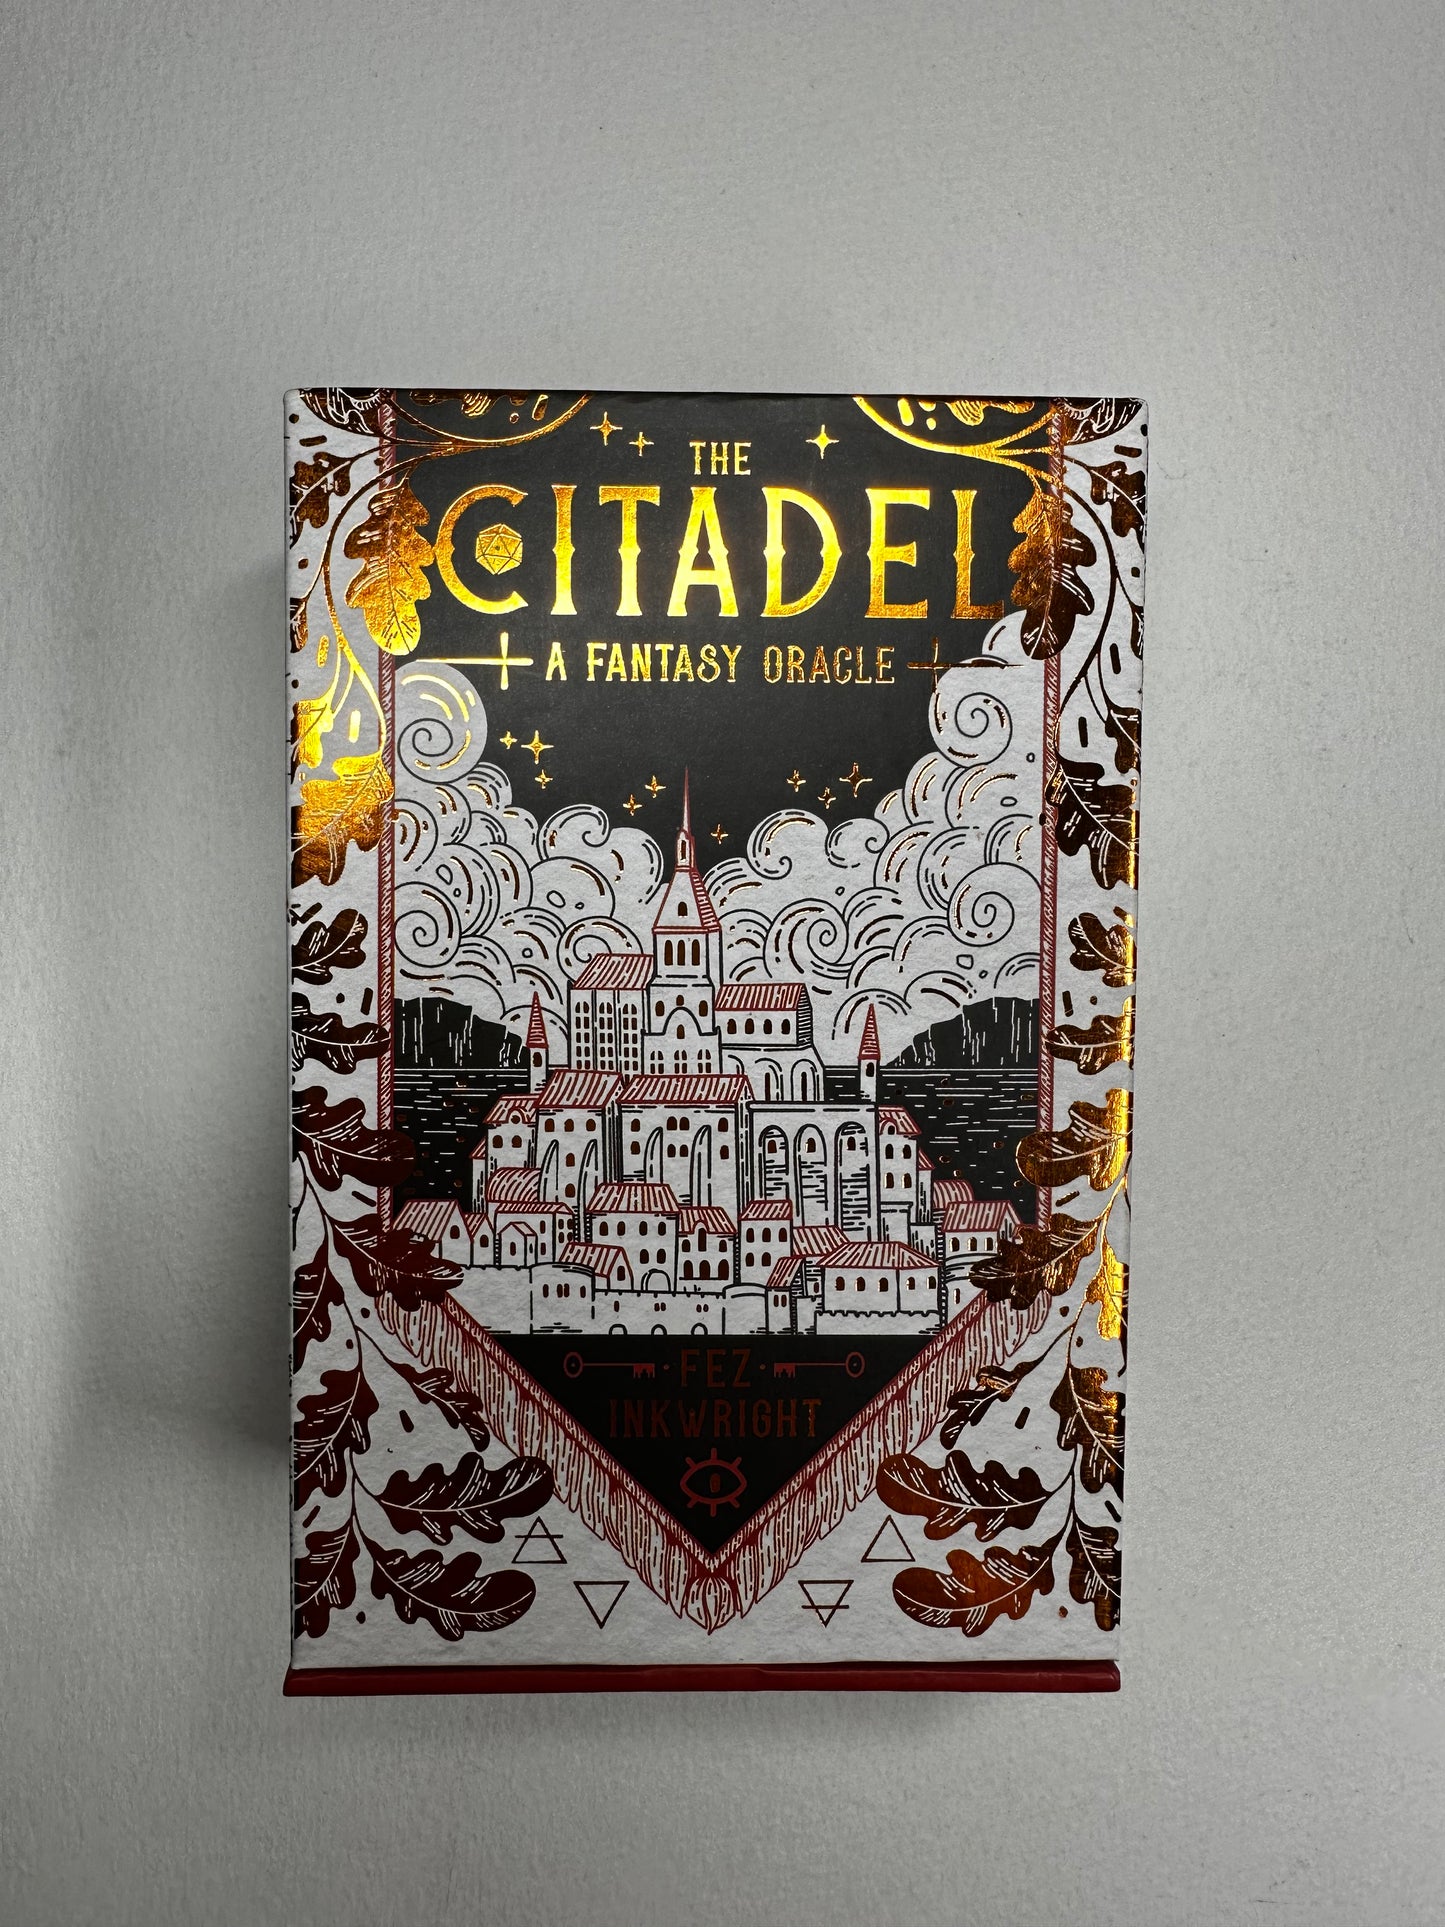 Tarot Reading with The Citadel Fantasy Oracle Deck